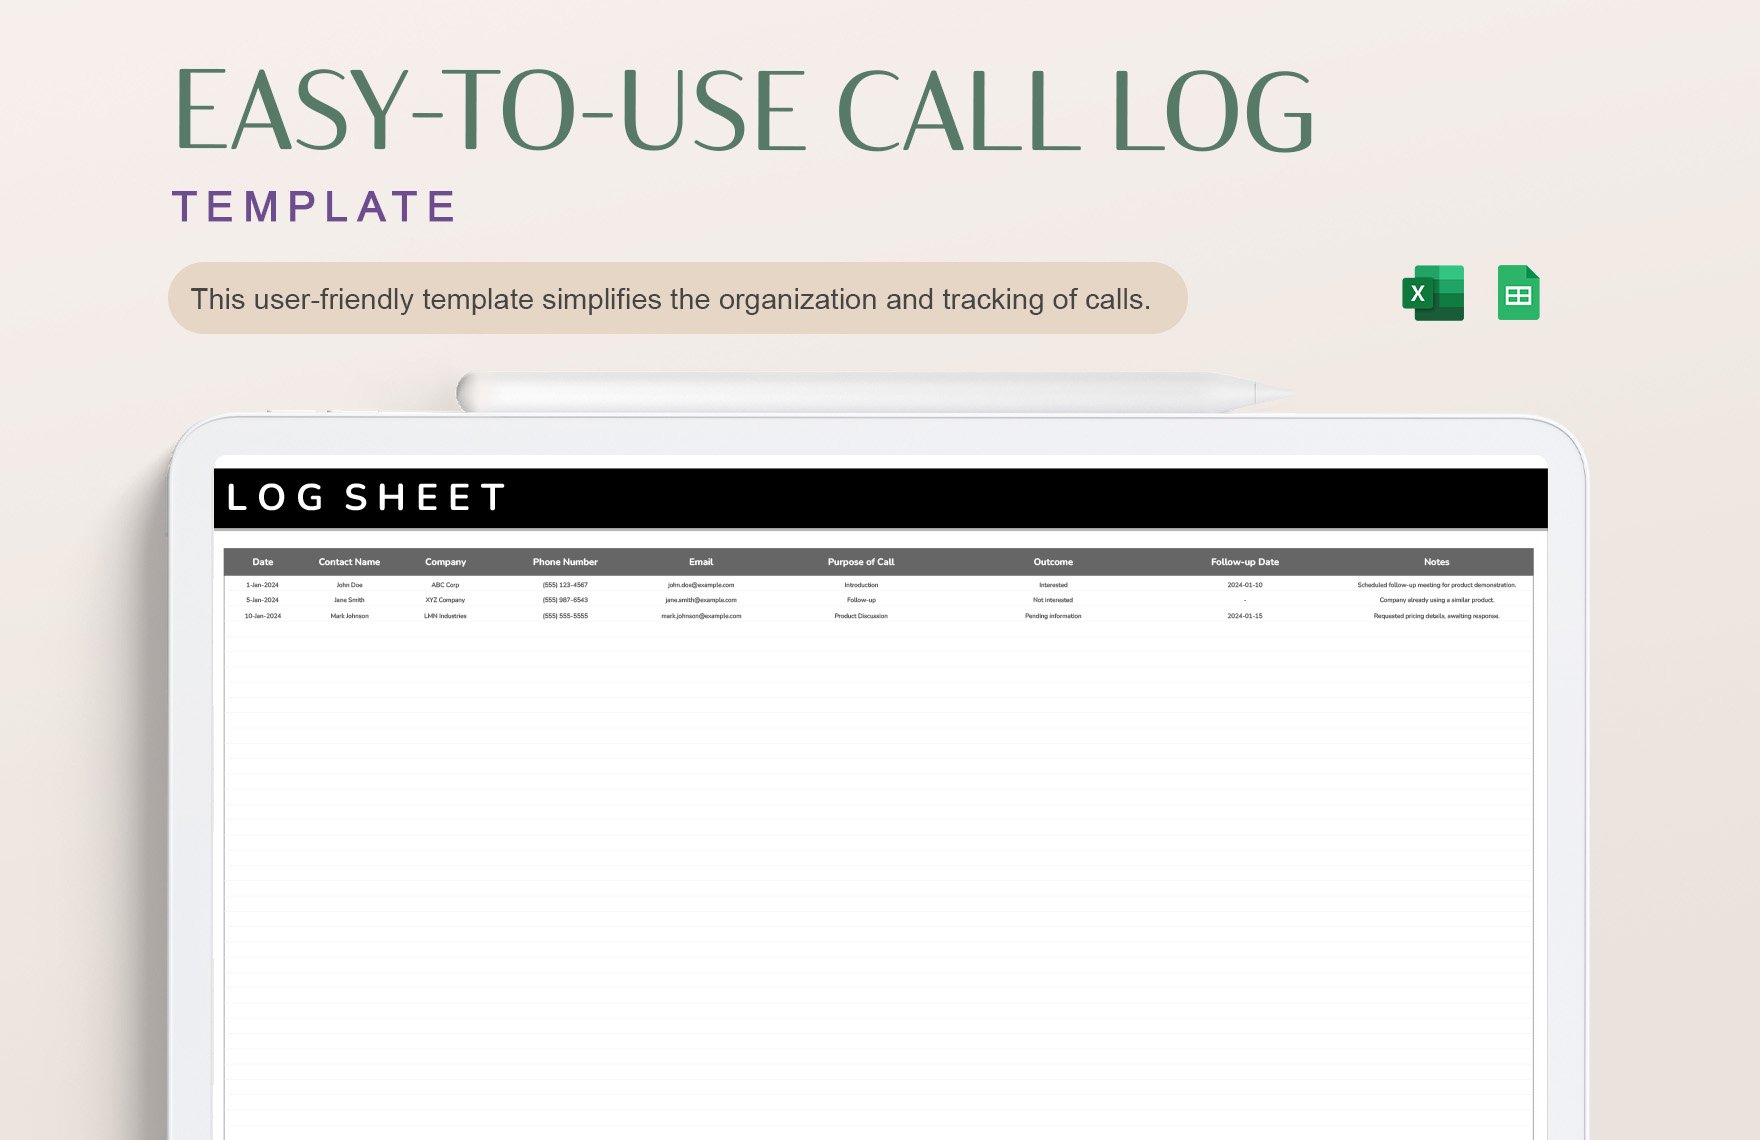 Free Easy-to-Use Call Log Template